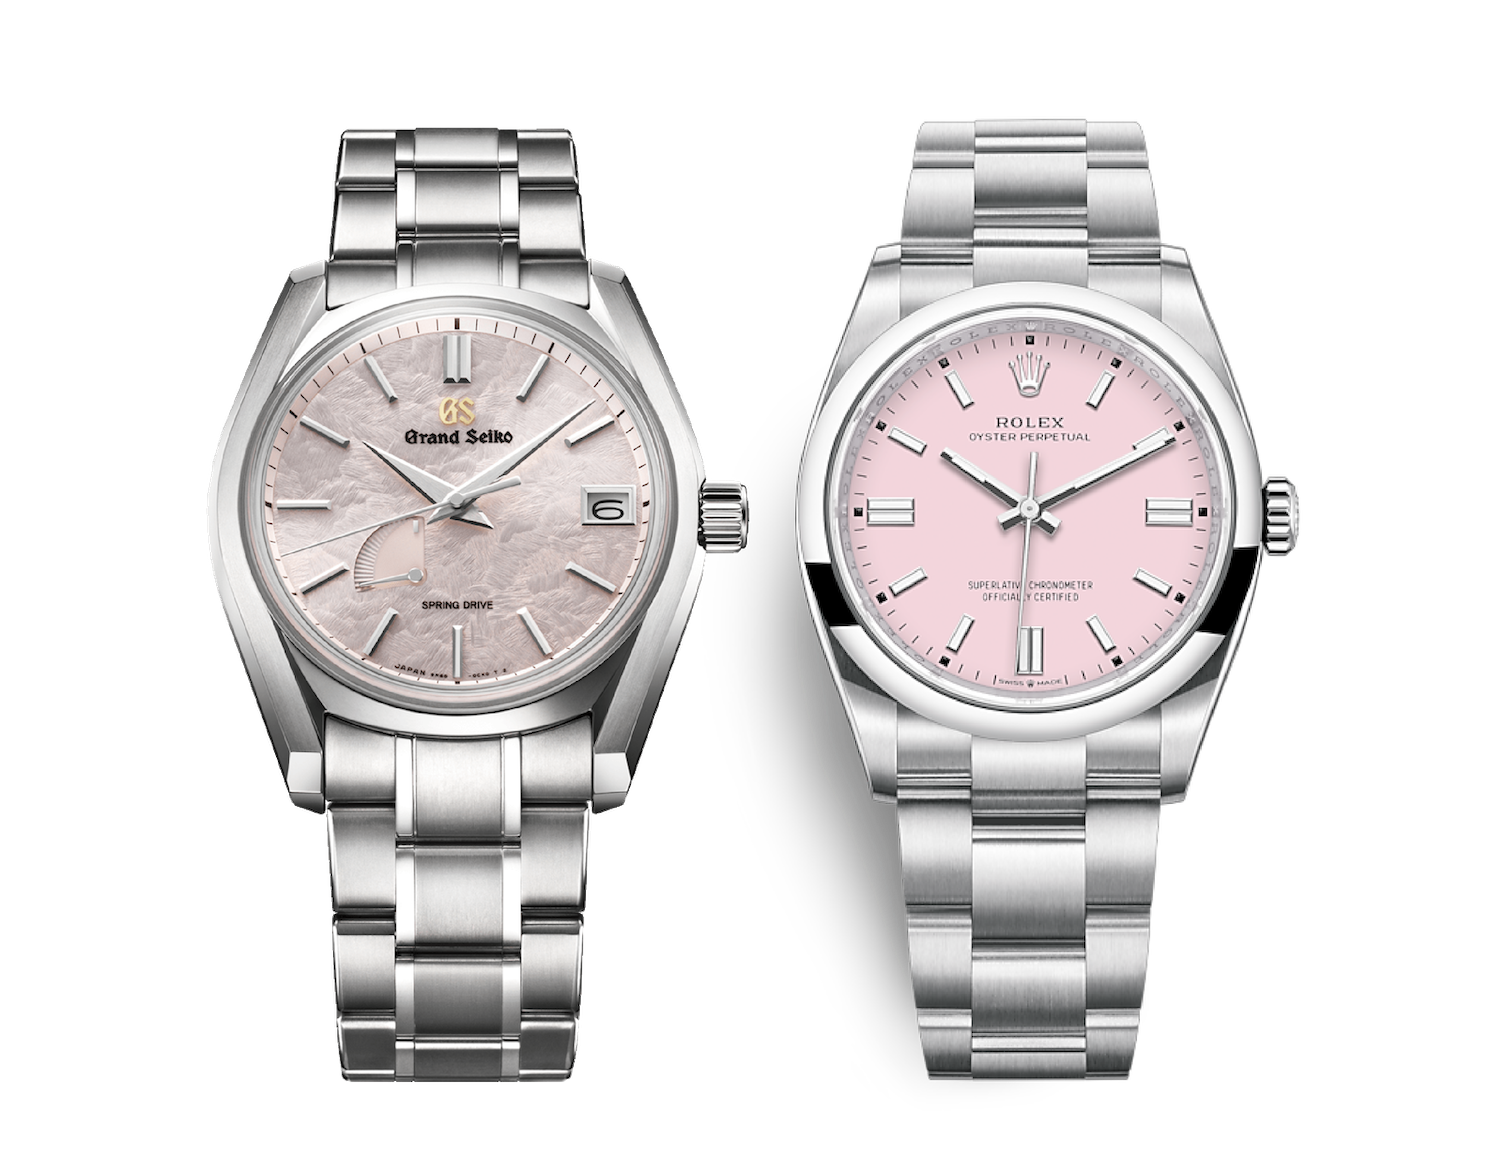 Why I bought the Grand Seiko SBGA413 instead of a Rolex OP